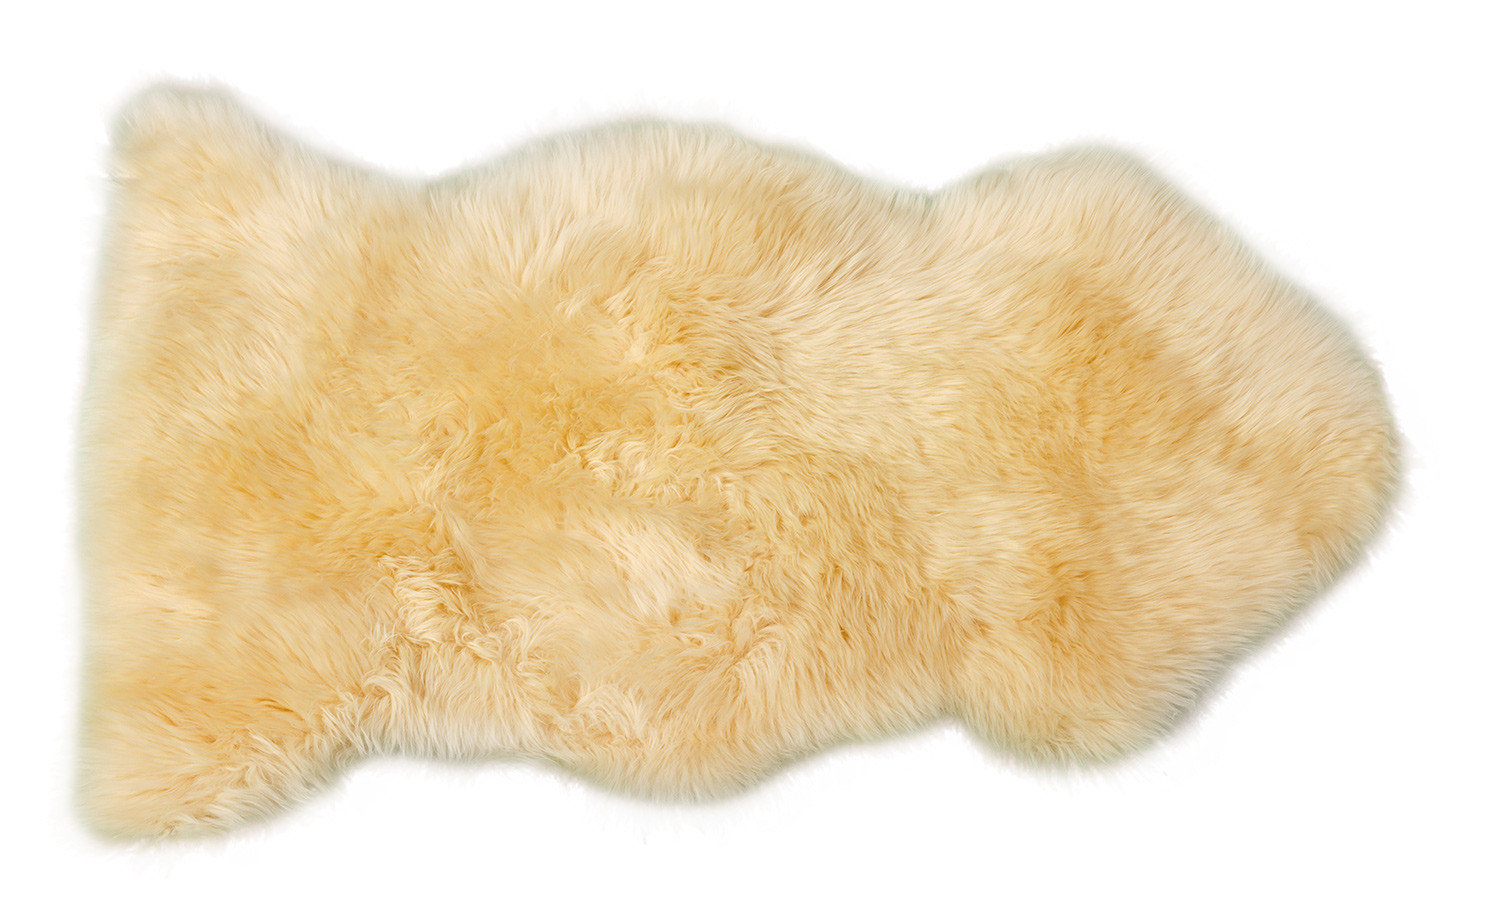 Details about   Genuine Australian Single Sheepskin Rug Extremely Soft Silky blush pink Wool US 